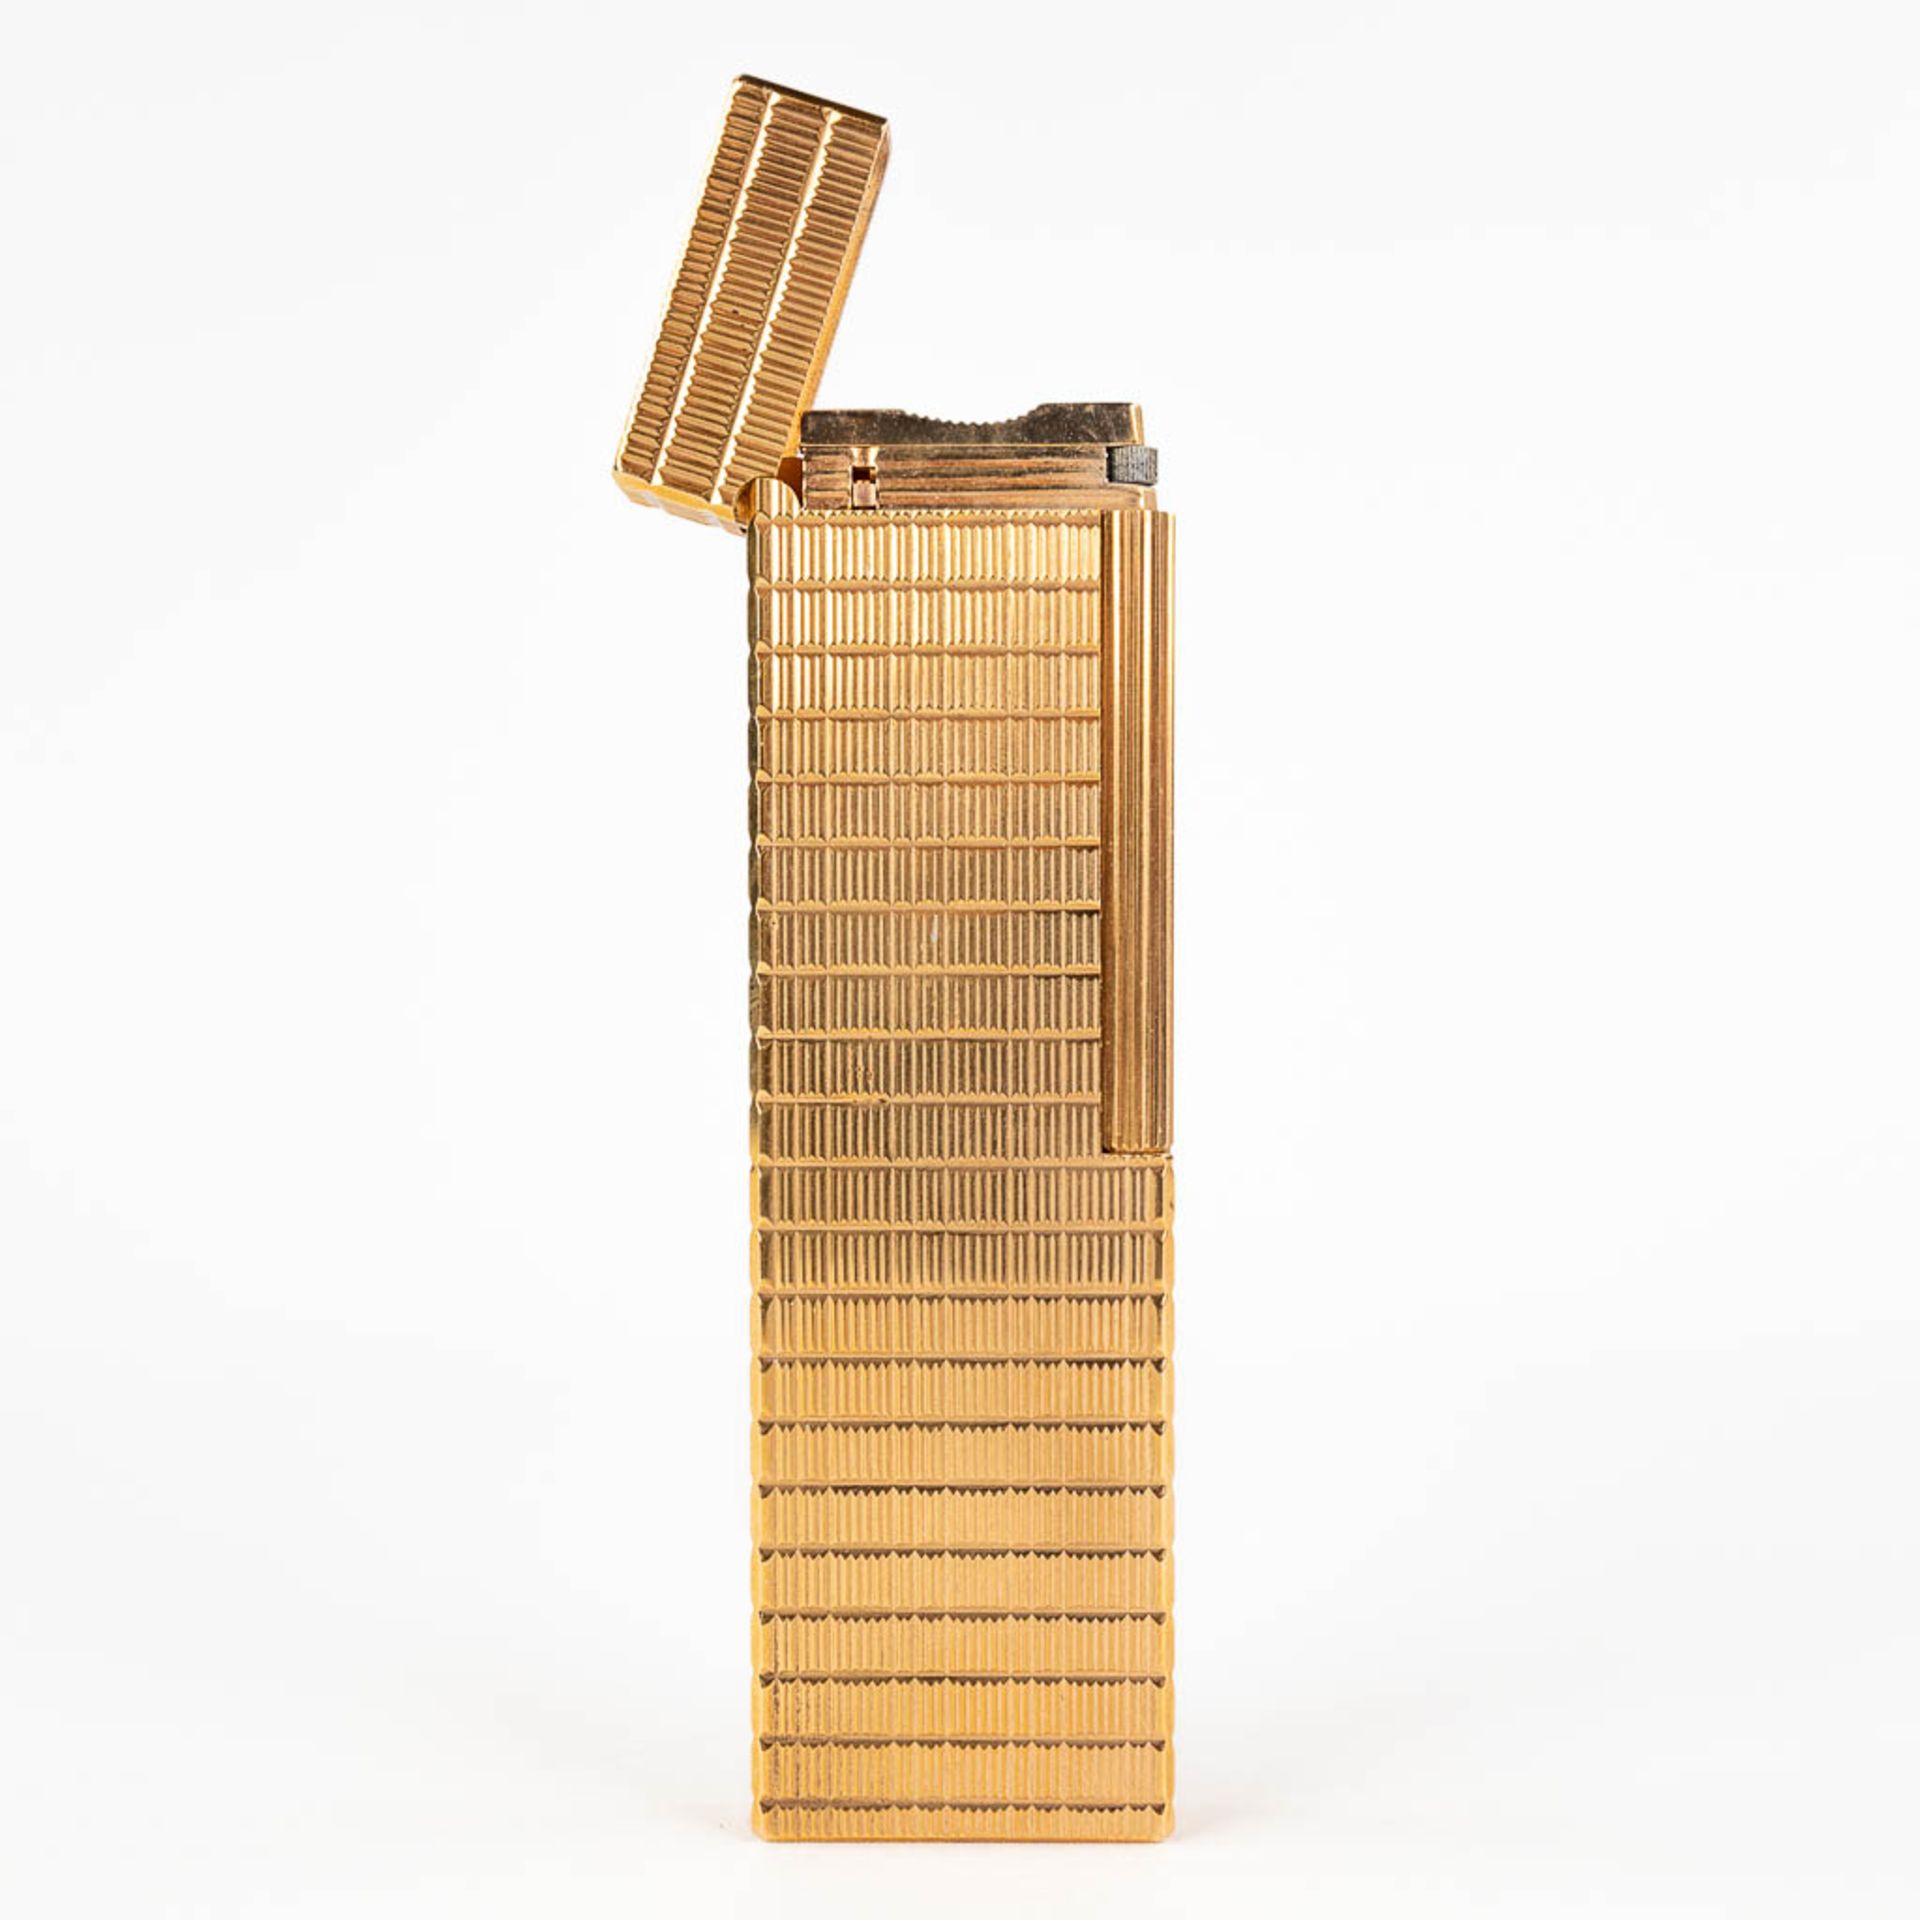 S.T. Dupont, a vintage lighter, gold-plated. In the original storage box. (L: 1,5 x W: 4 x H: 14 cm) - Image 11 of 14